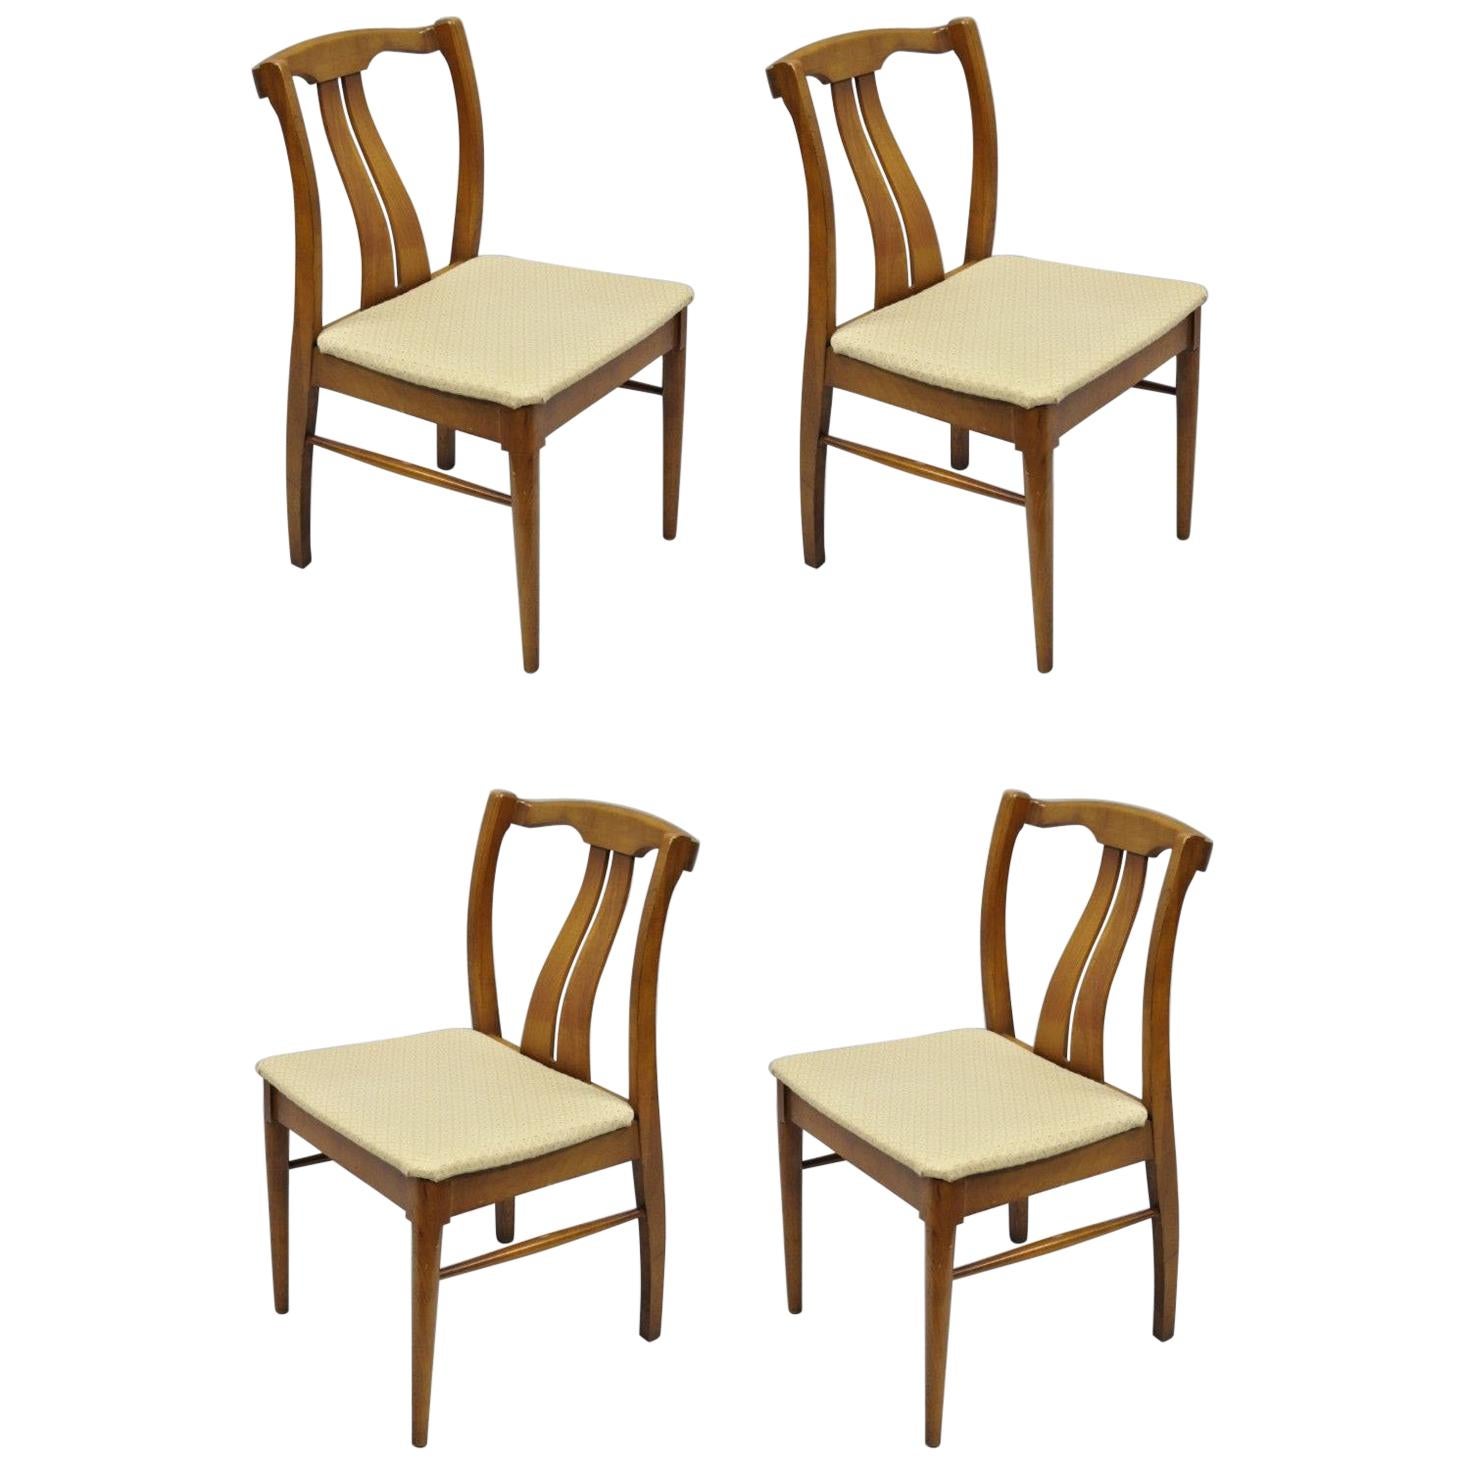 4 Vintage Mid-Century Modern Curved Back Sculptured Walnut Dining Chairs